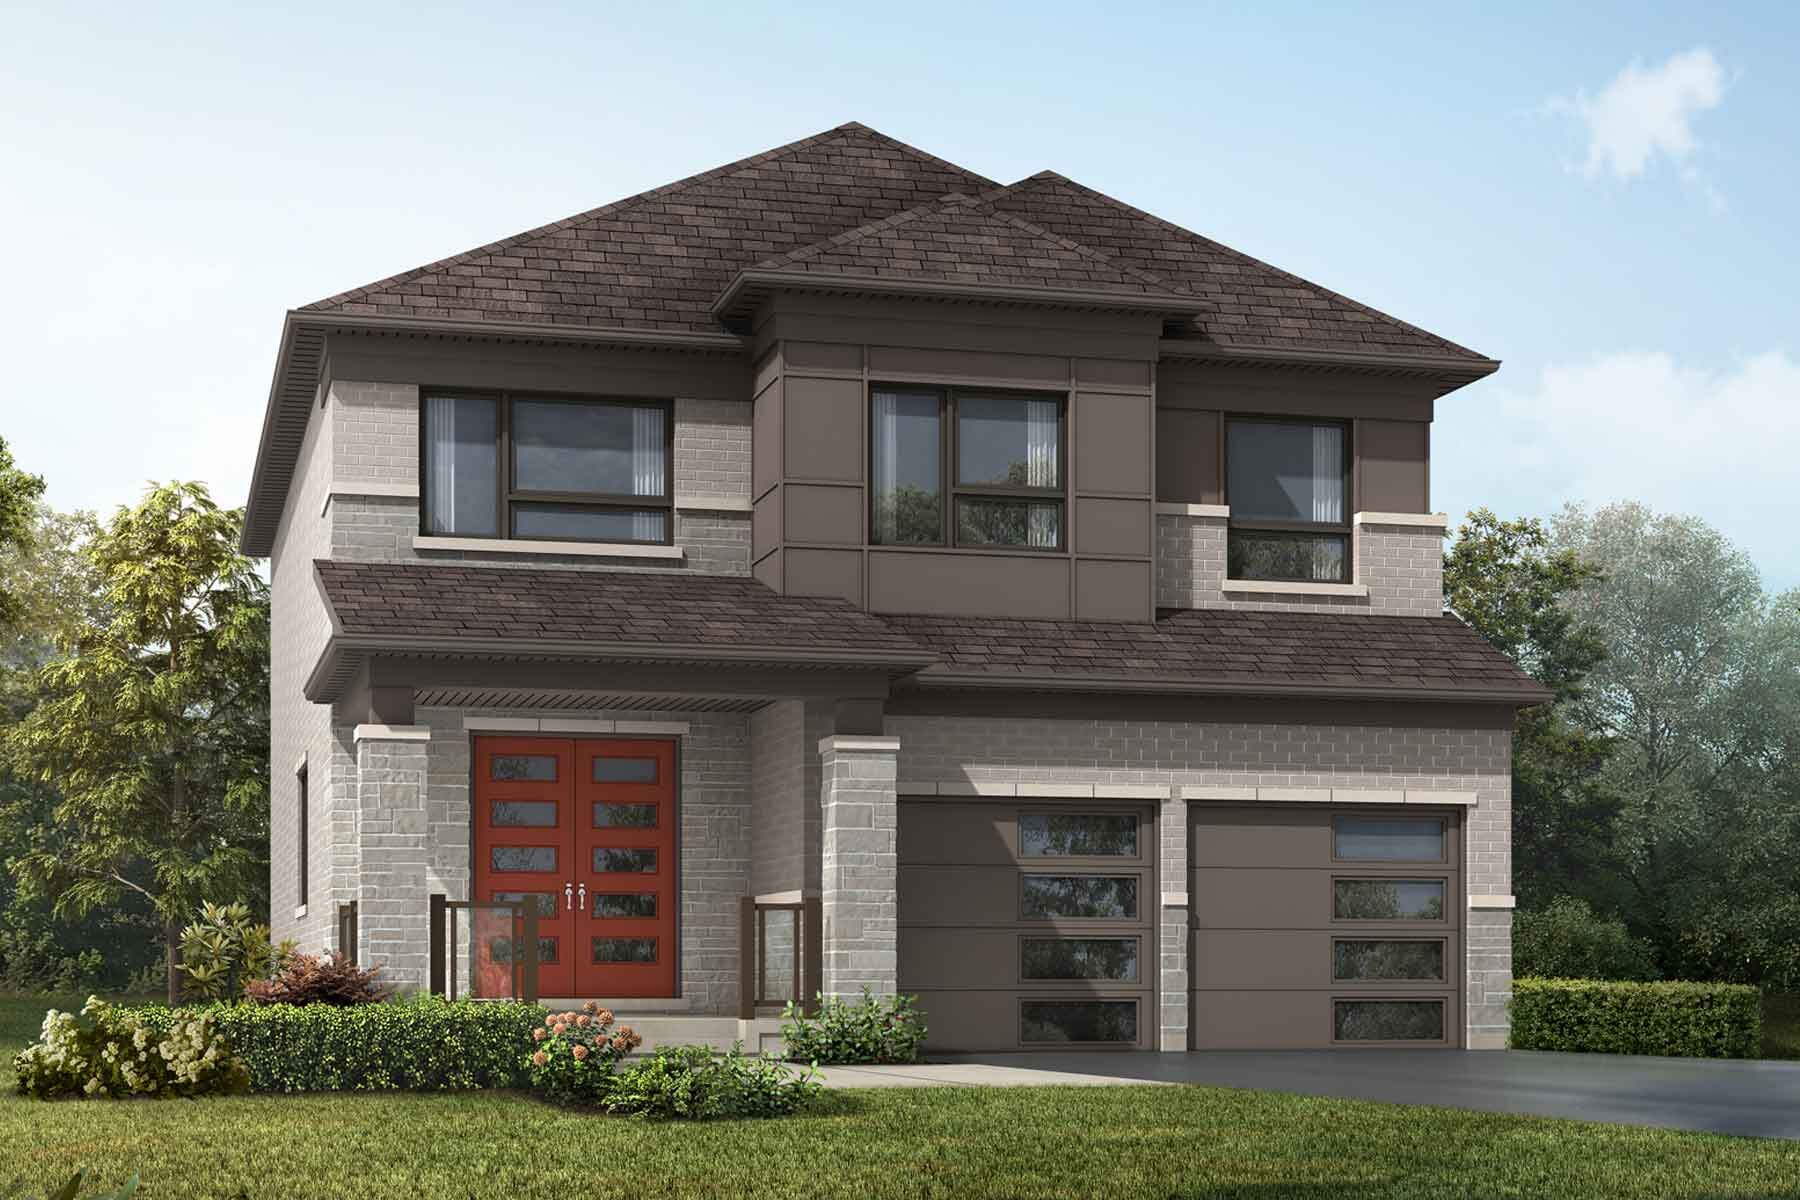 A detached Modern style home with a double car garage.